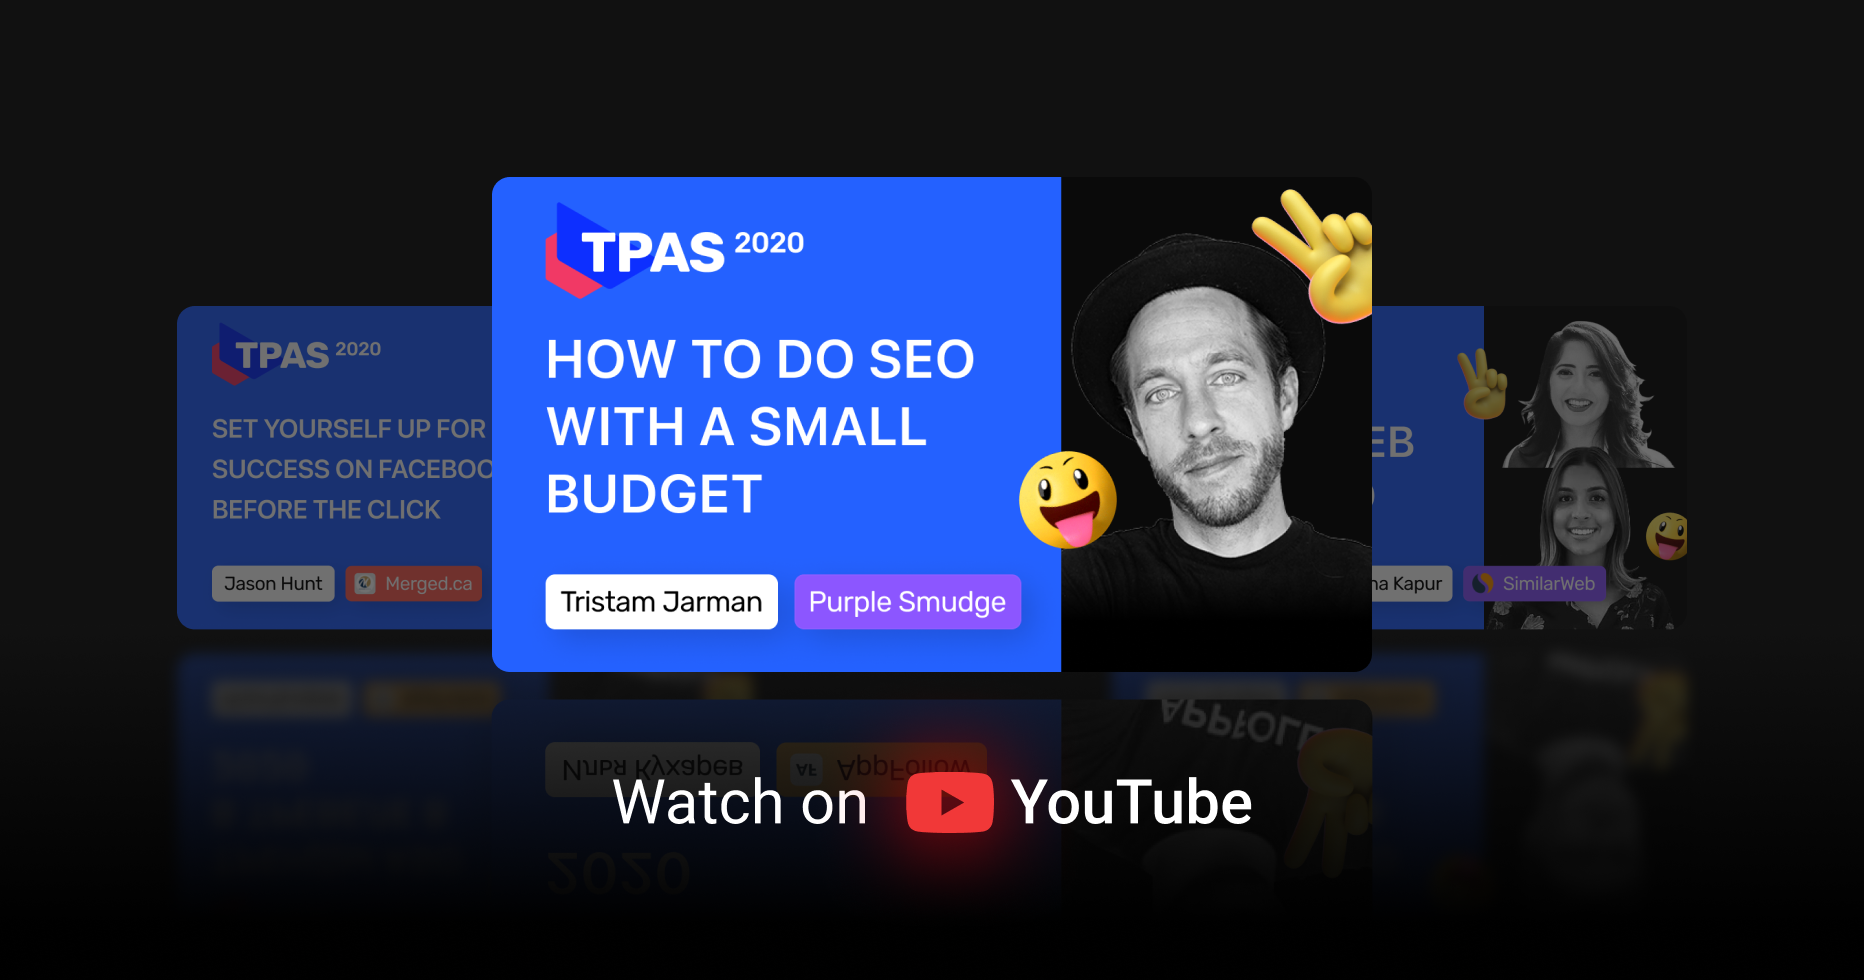 How to research your competitors, perform an SEO site audit, and conduct SEO on a budget by Tristam Jarman